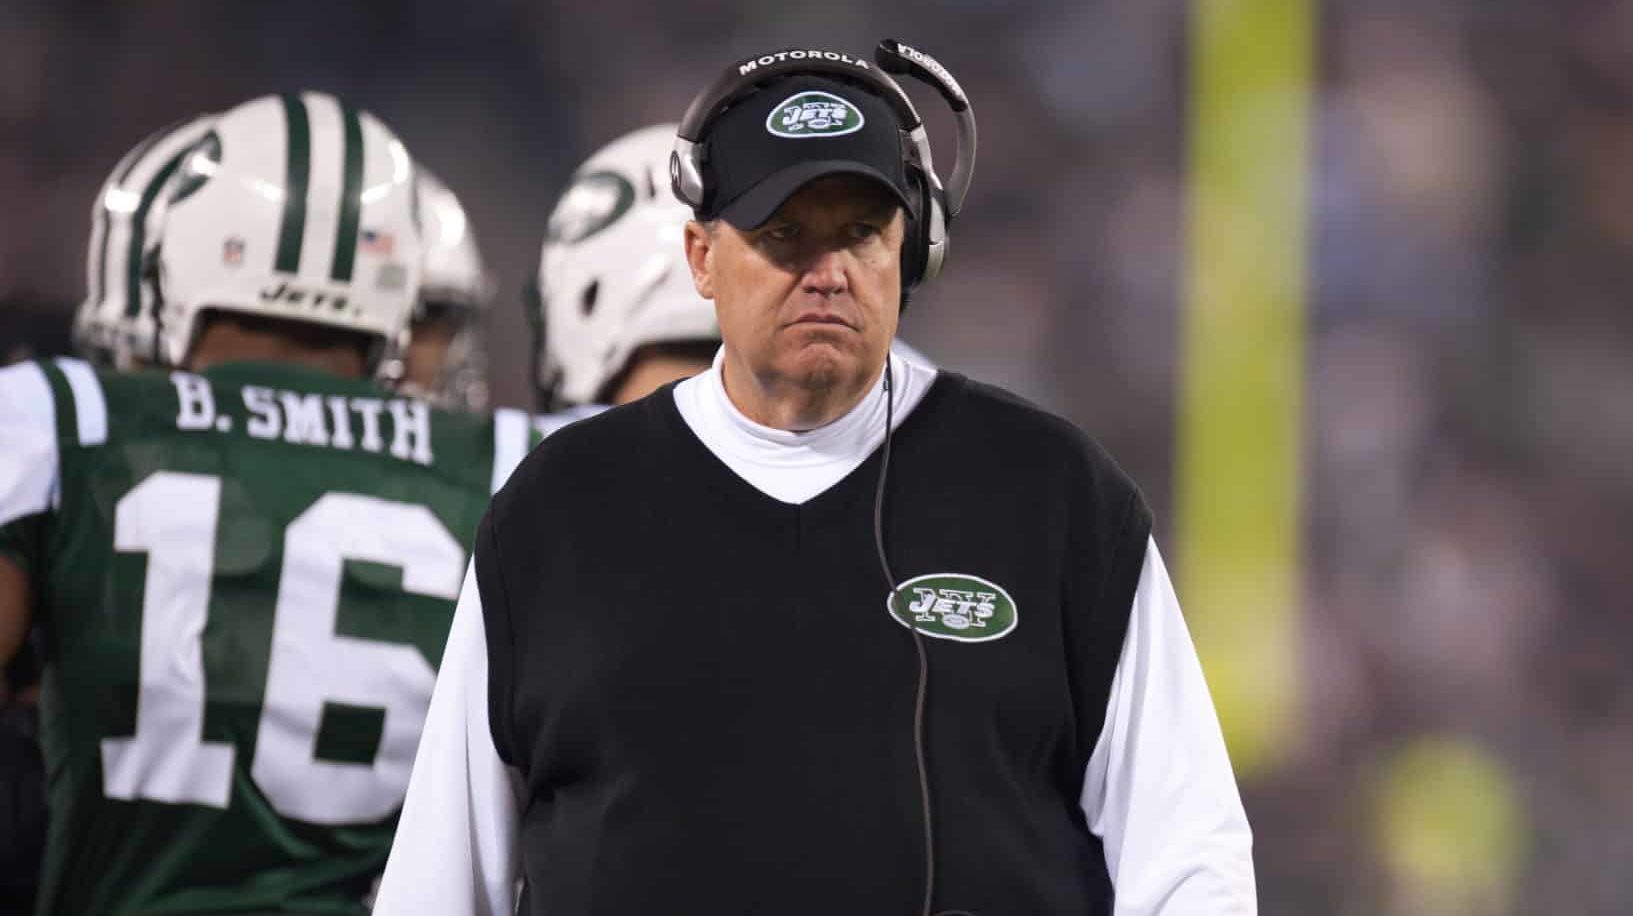 EAST RUTHERFORD, NJ - NOVEMBER 25: Head coach Rex Ryan of the New York Jets looks on from the bench on November 25, 2010 at the New Meadowlands Stadium in East Rutherford, New Jersey.The Jets defeated the Bengals 26 to 10.